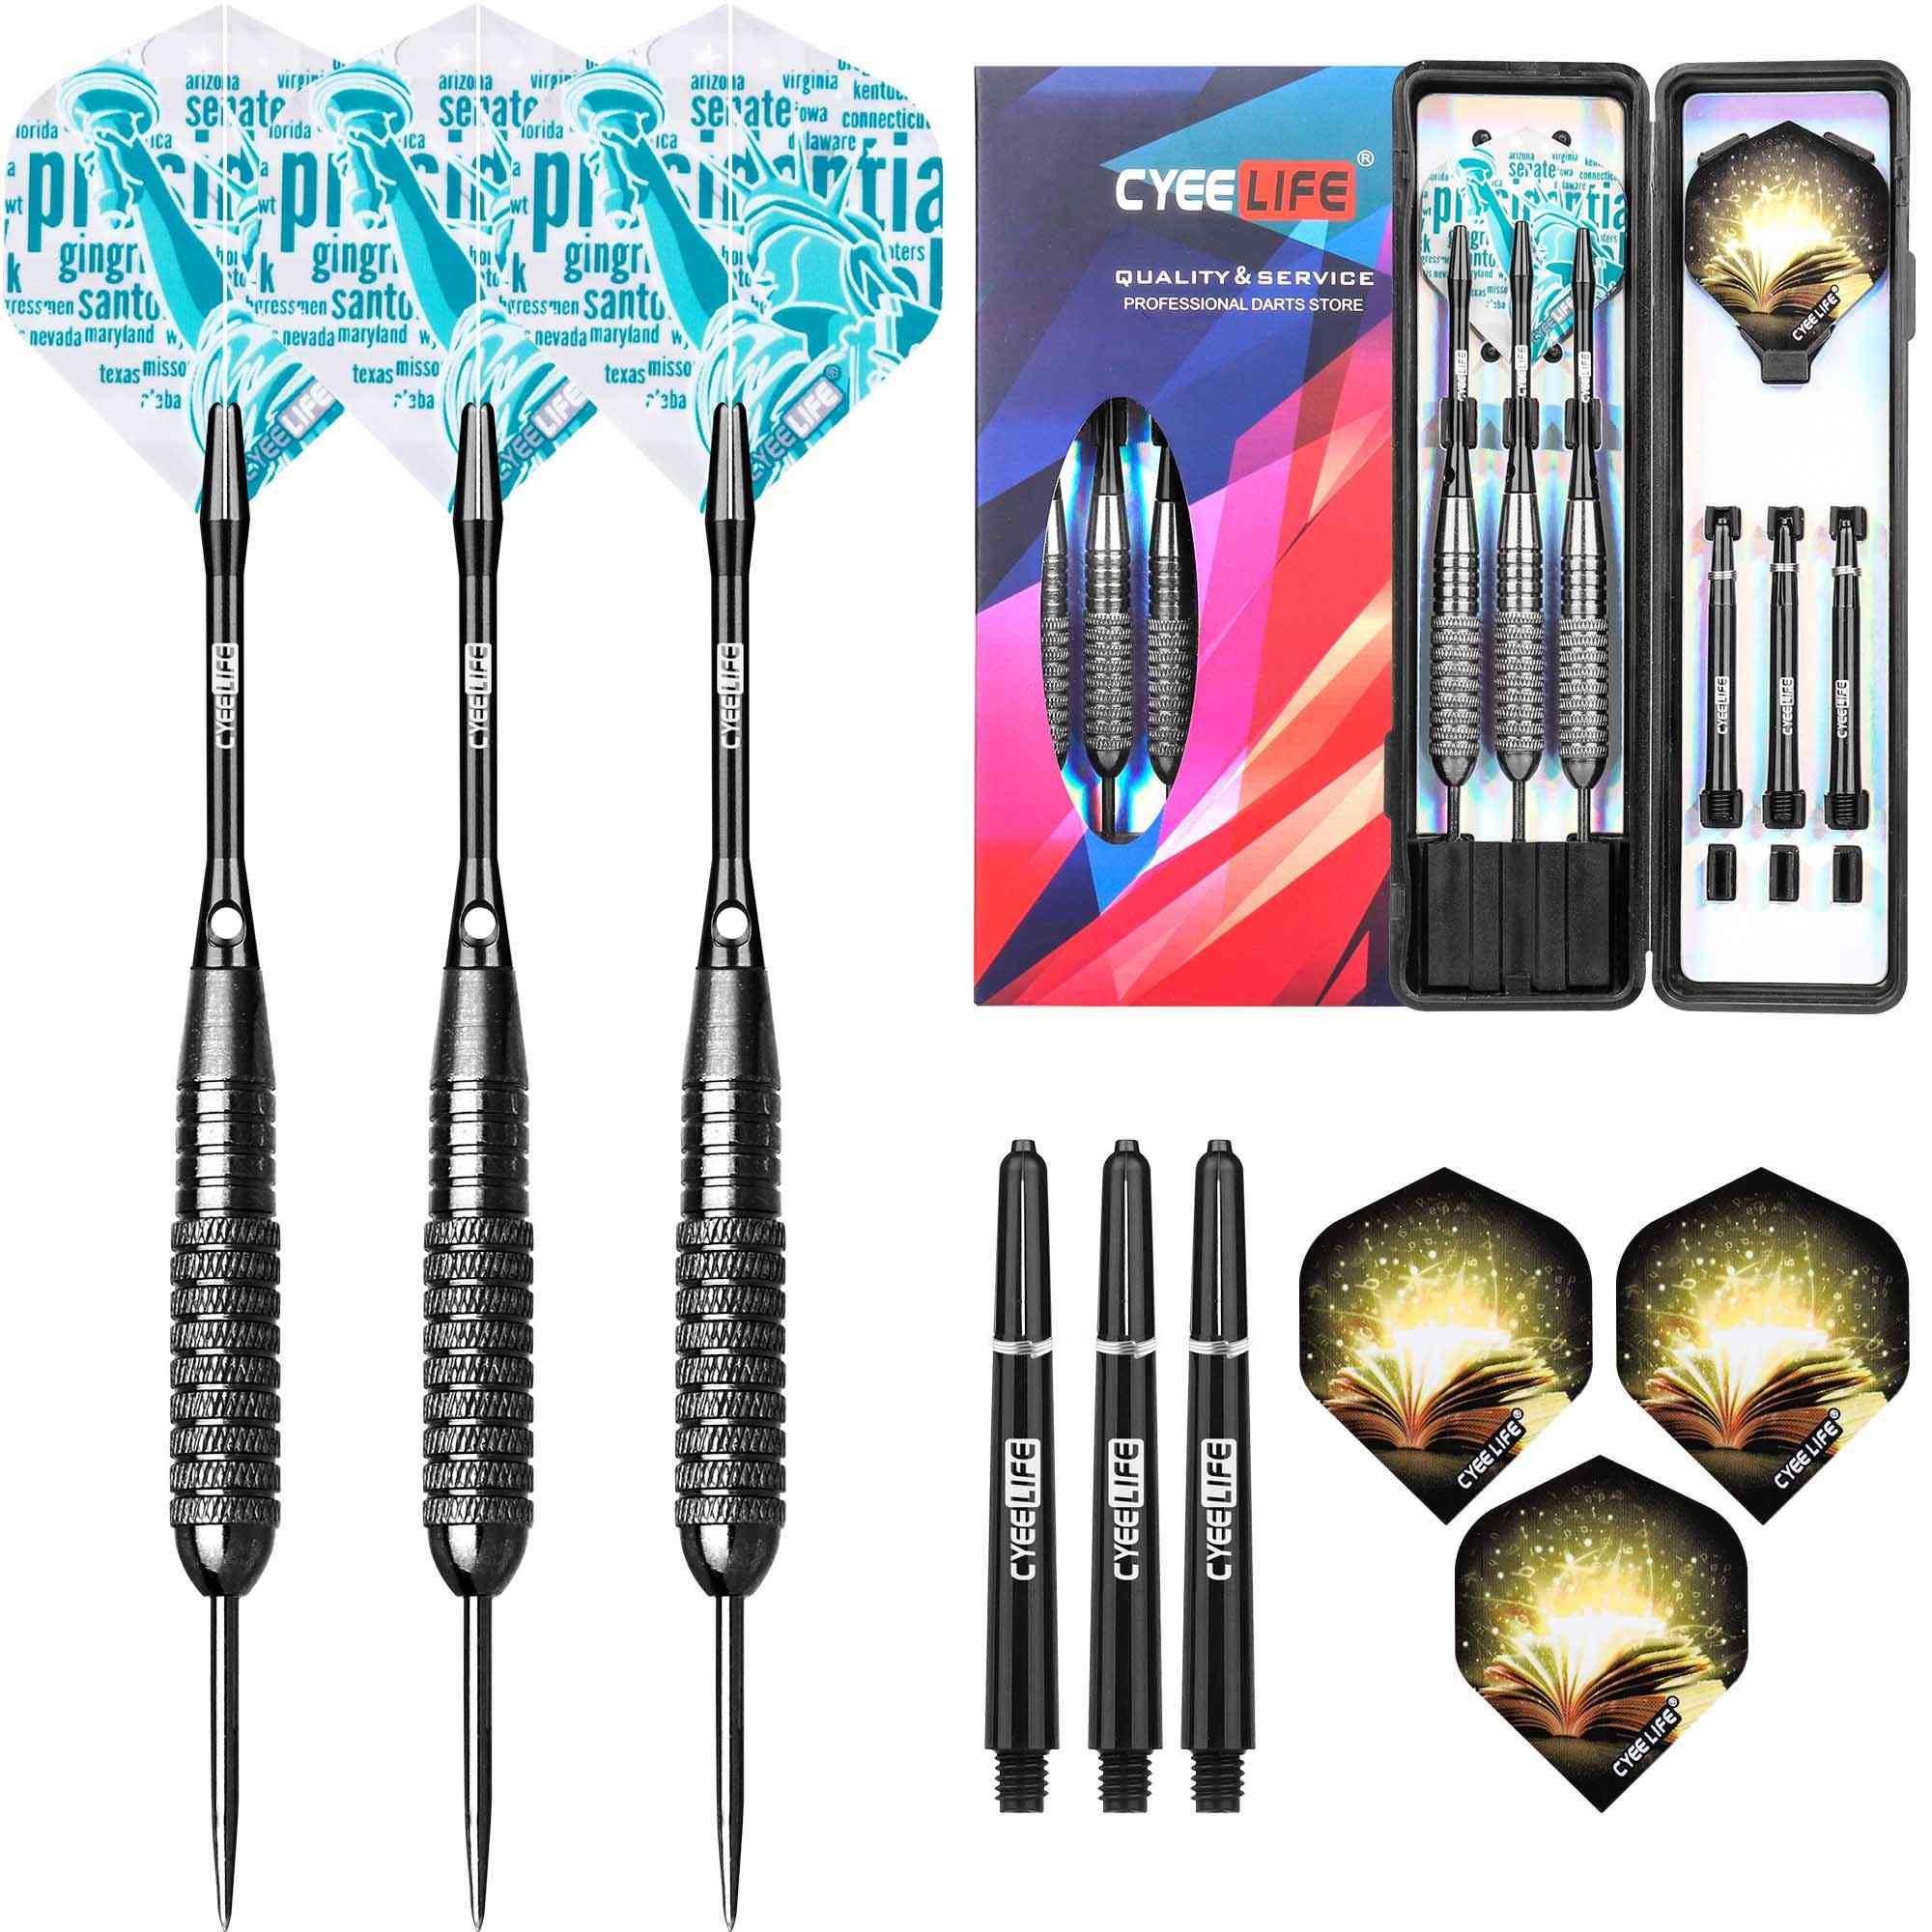 Tip Darts Professional With Cace House Dart Set